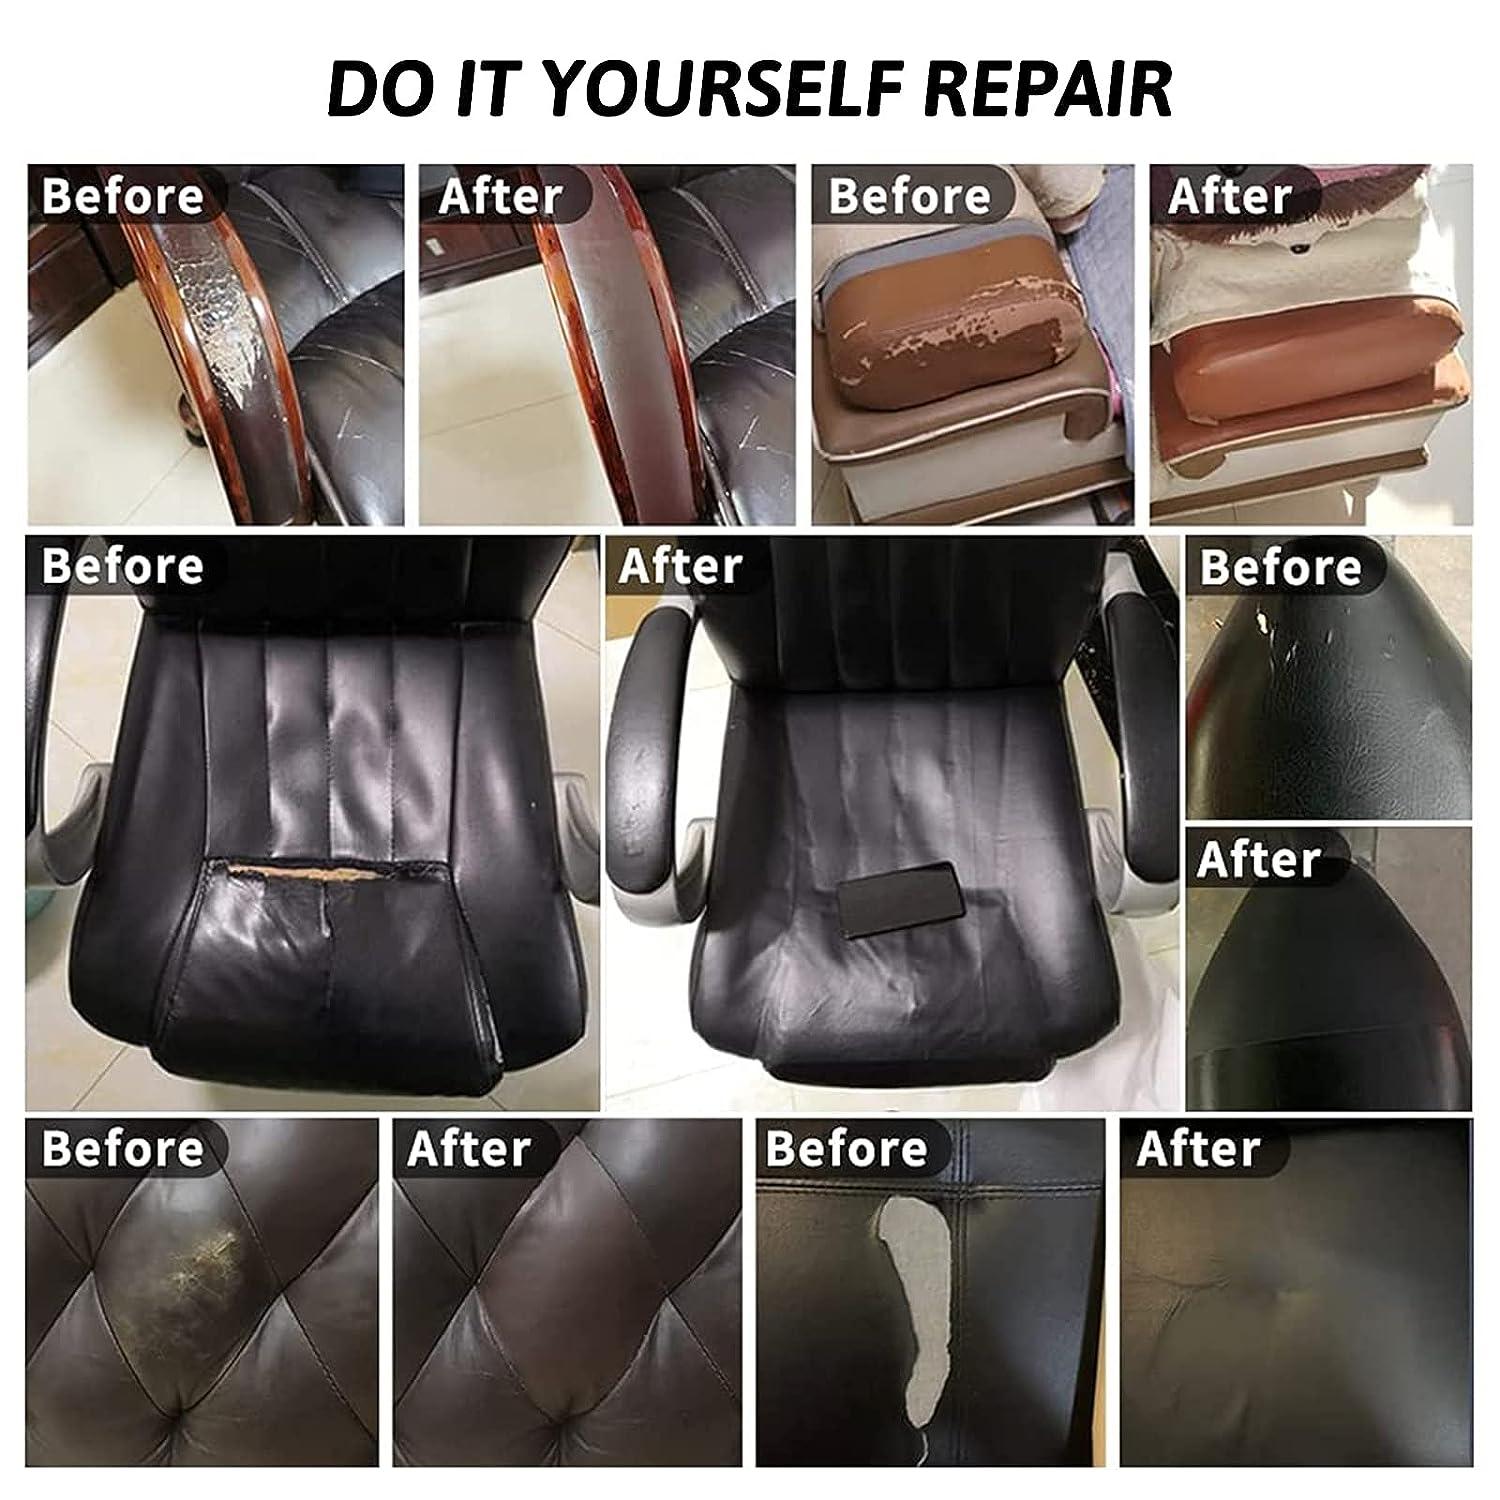 Leather Repair Patch